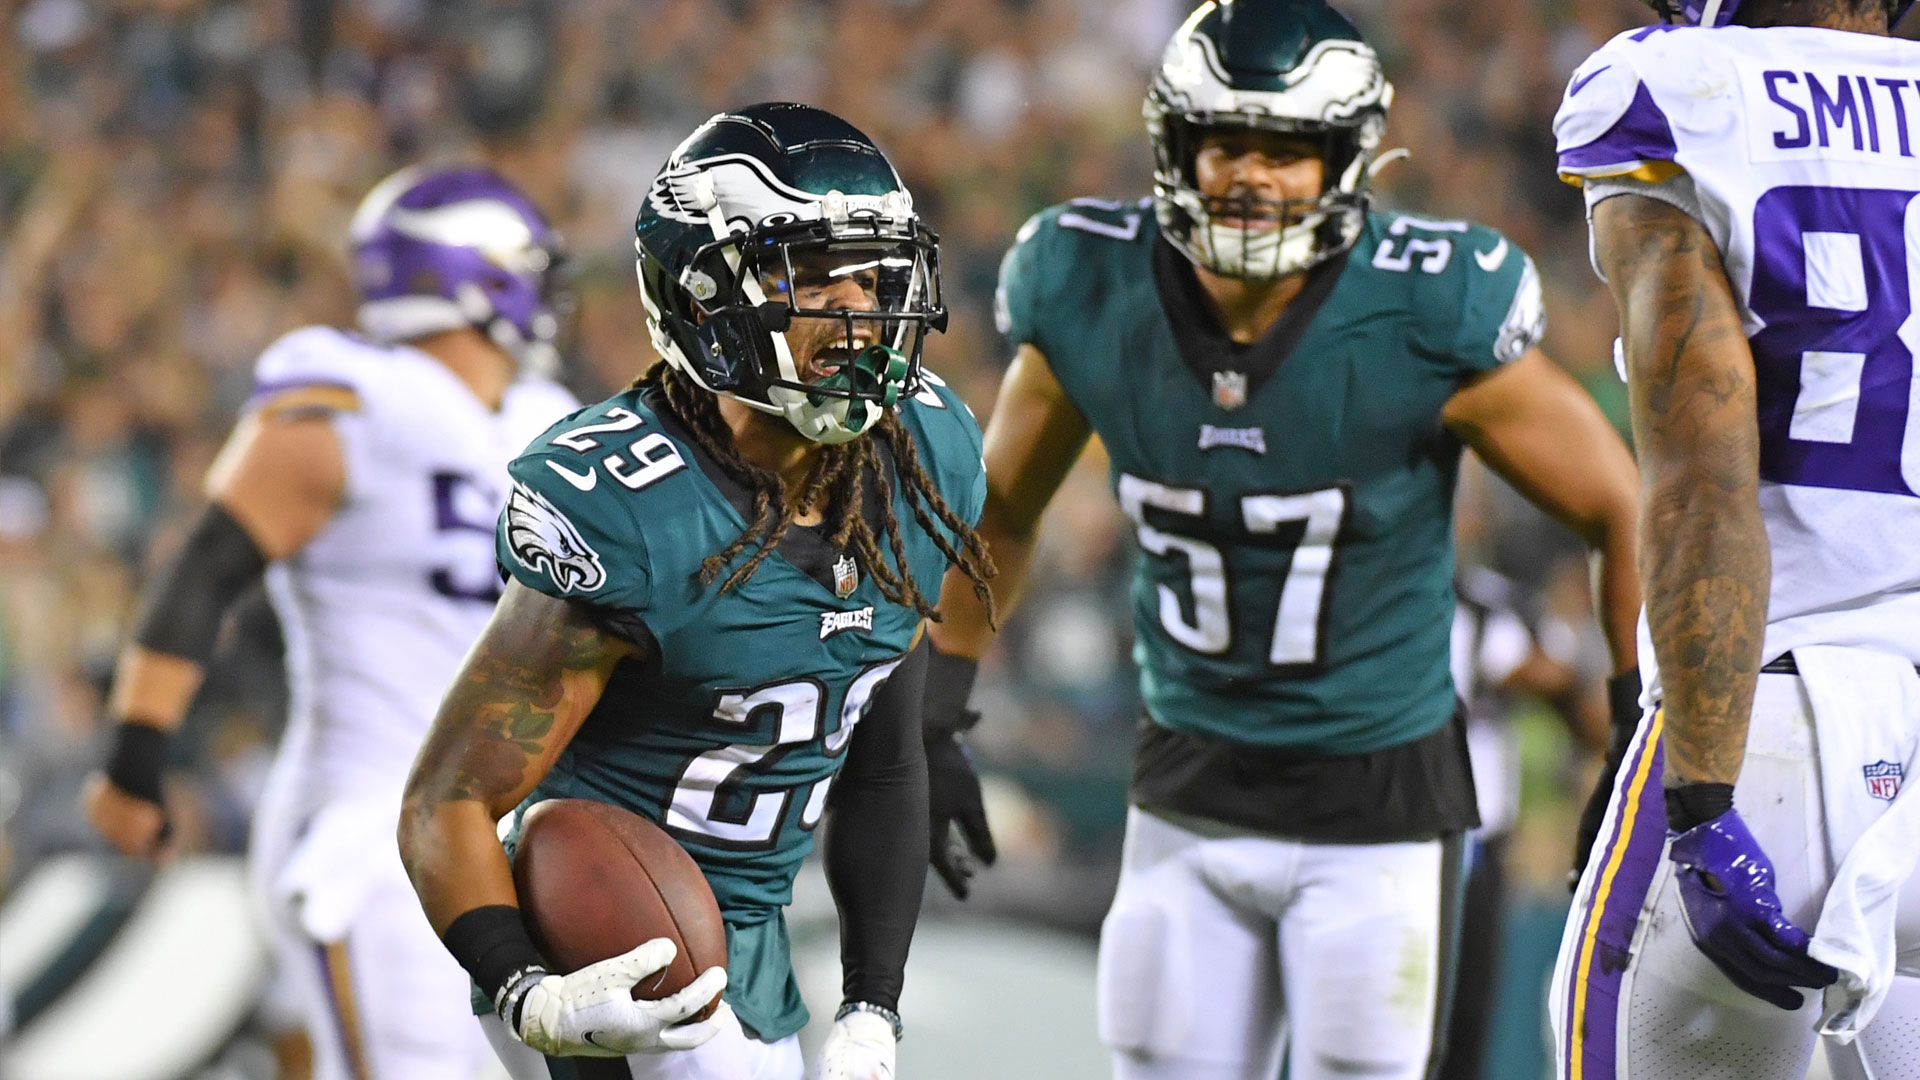 Plenty of Good Grades for Eagles After ‘A' Win Over Vikings on MNF